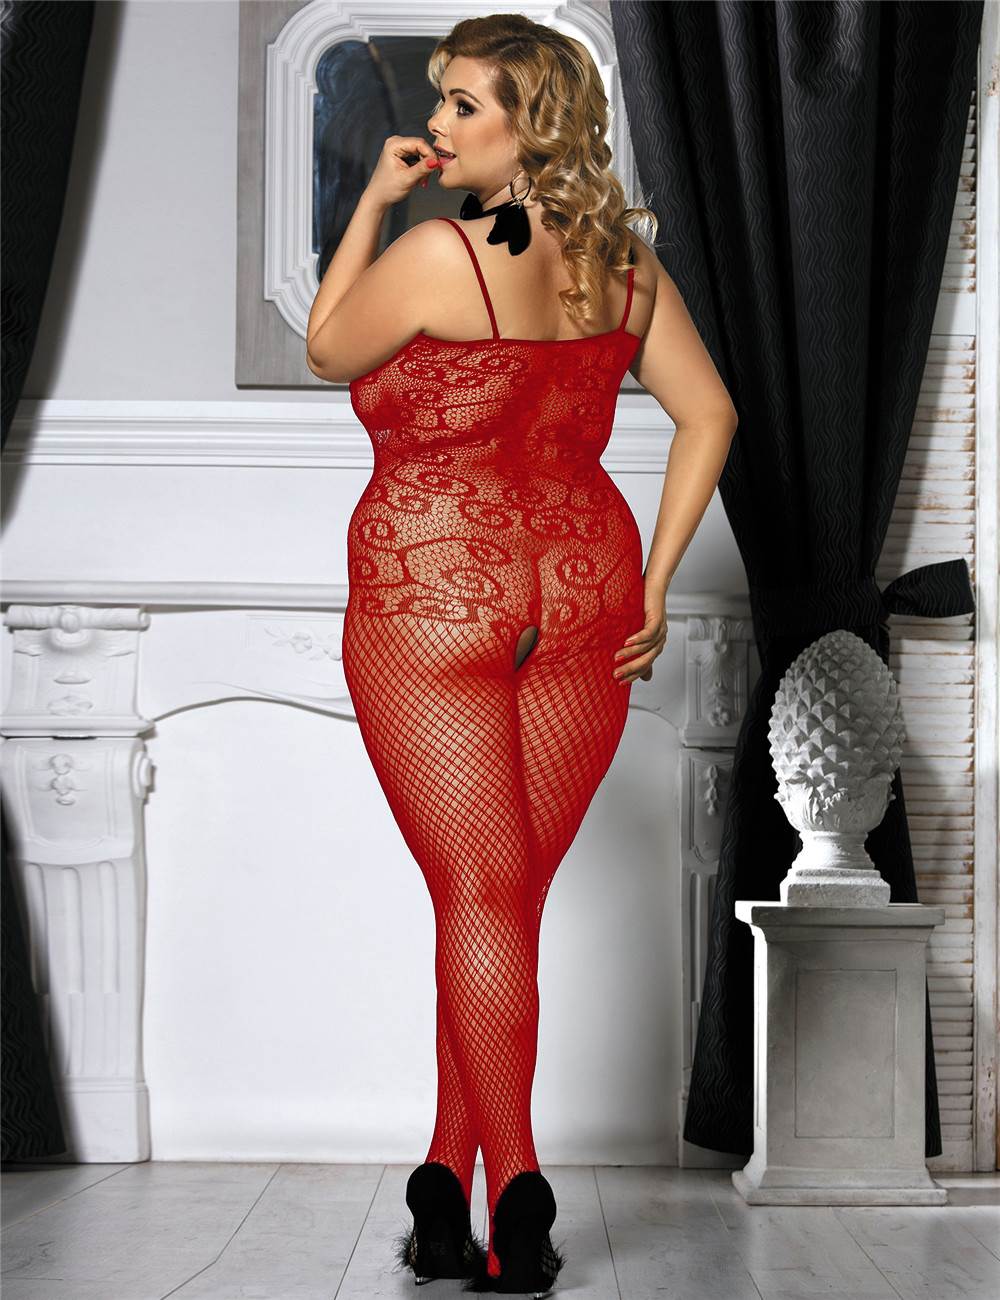 JCSTK - Unisex Lingerie Crocheted Fishnet Bodystocking with Keyhole Front Red